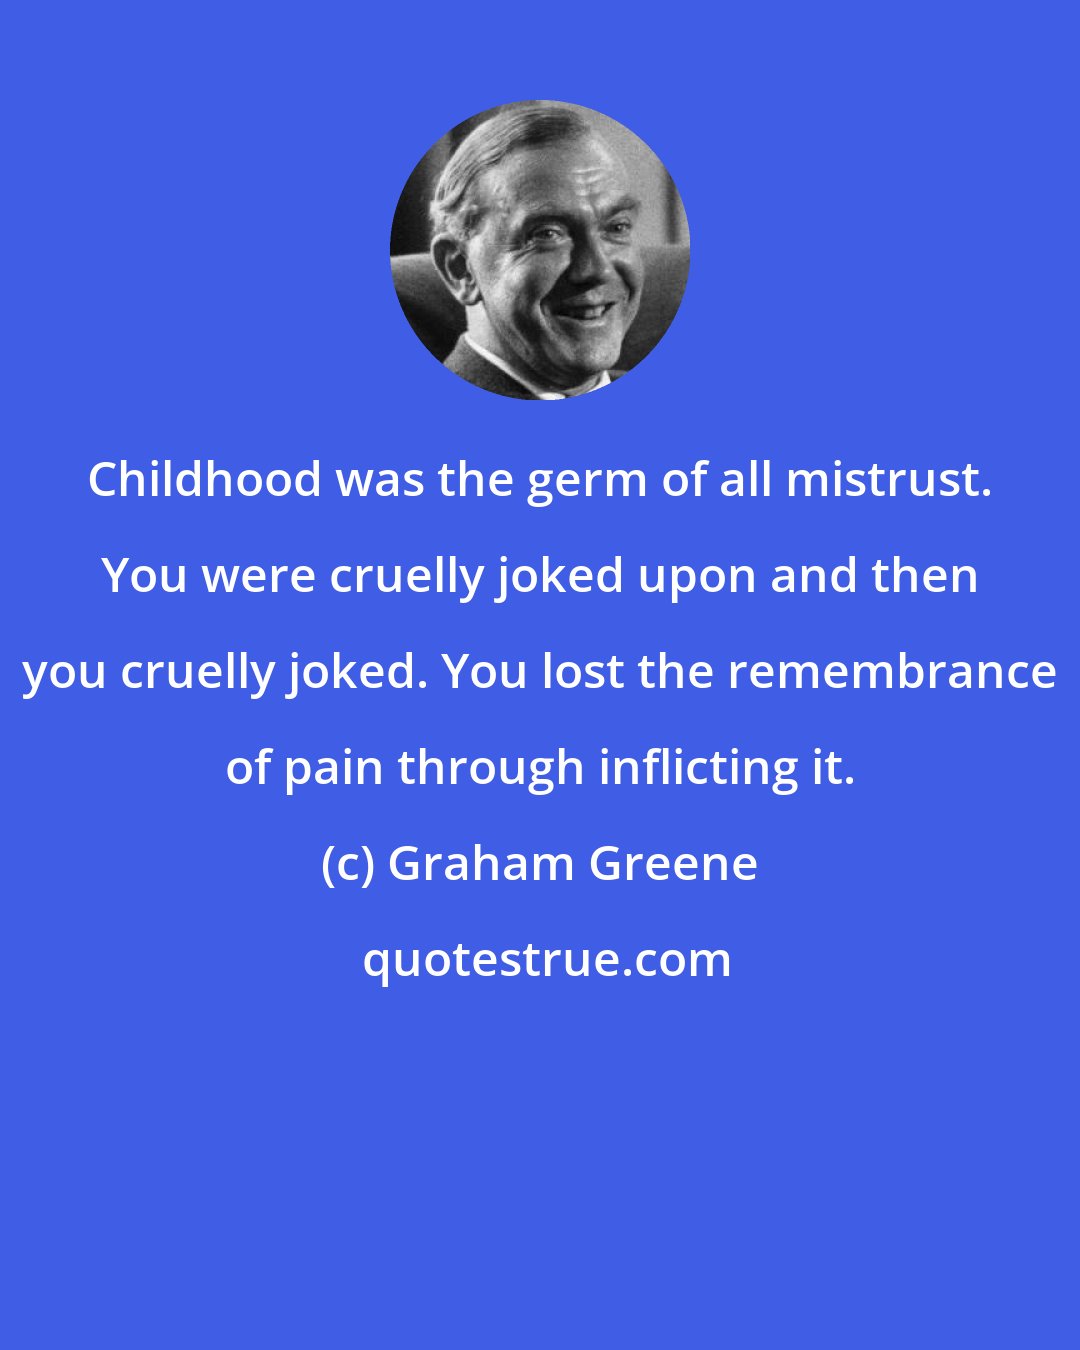 Graham Greene: Childhood was the germ of all mistrust. You were cruelly joked upon and then you cruelly joked. You lost the remembrance of pain through inflicting it.